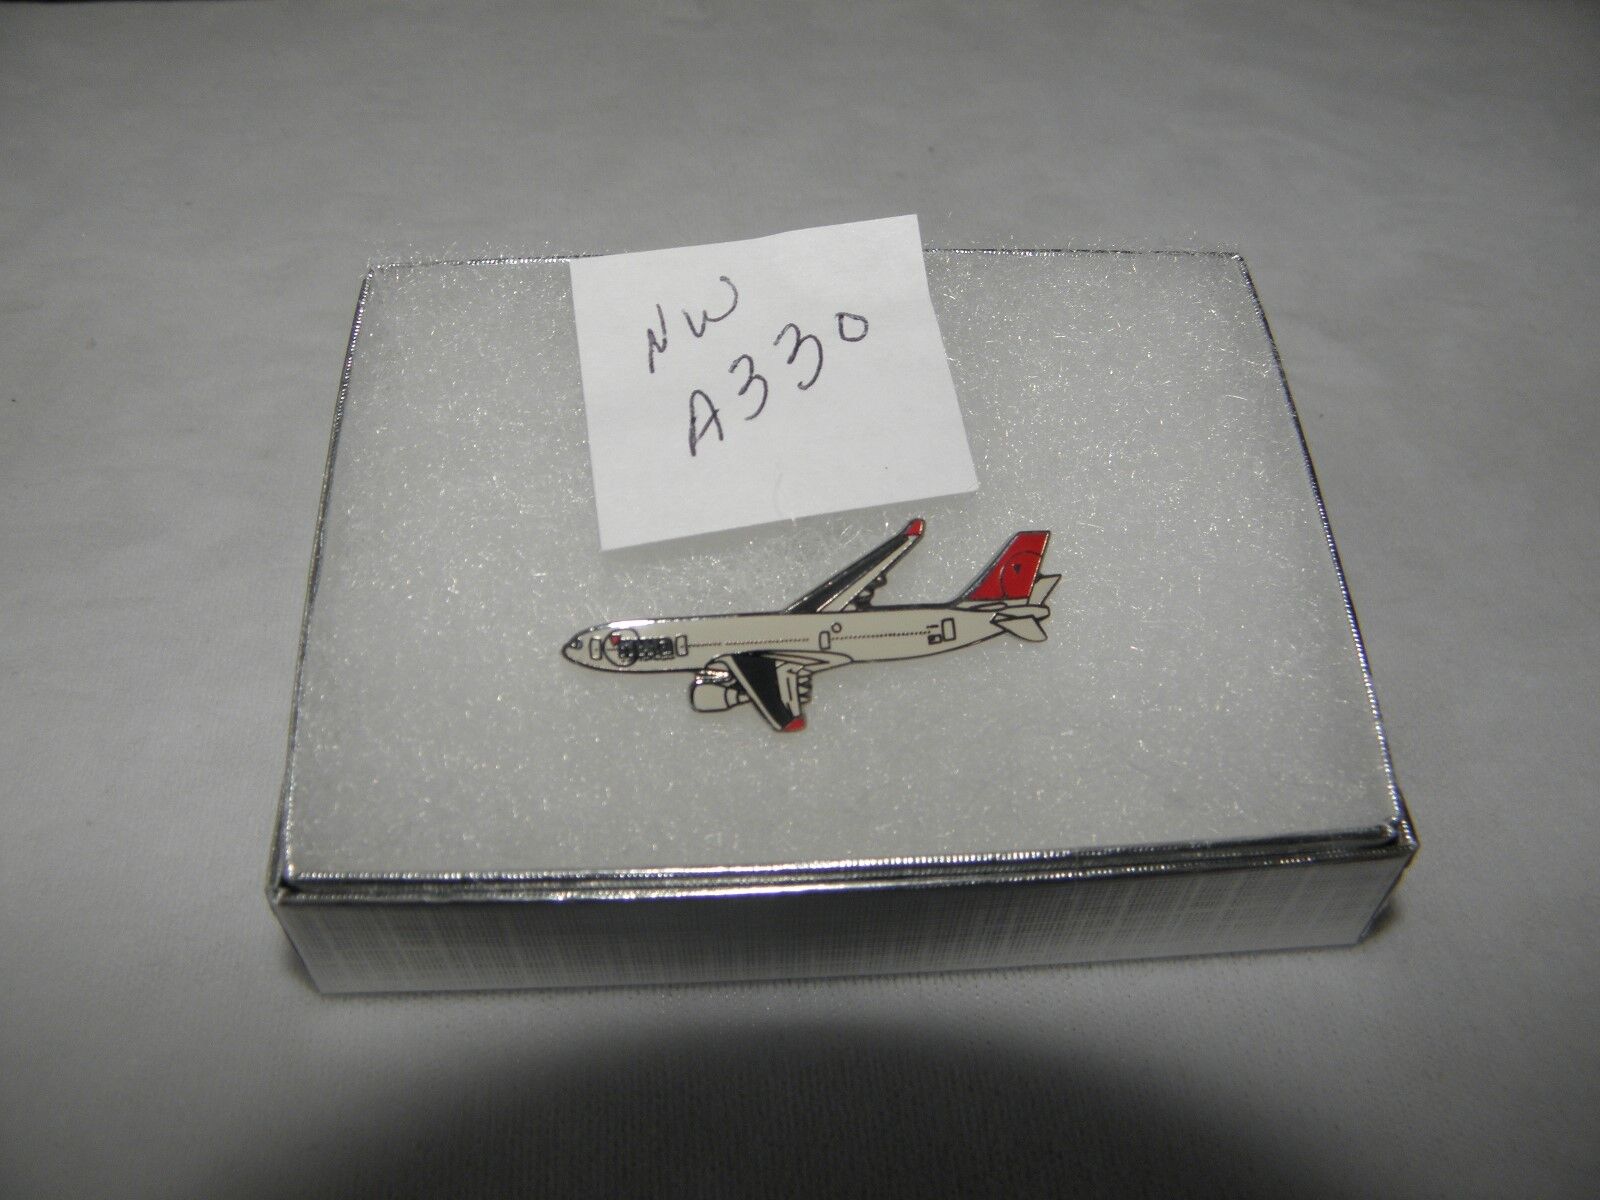 NORTHWEST AIRLINES A330 AIRBUS AIRPLANE LAPEL TACK PIN NWA PILOT CHRISTMAS GIFT 